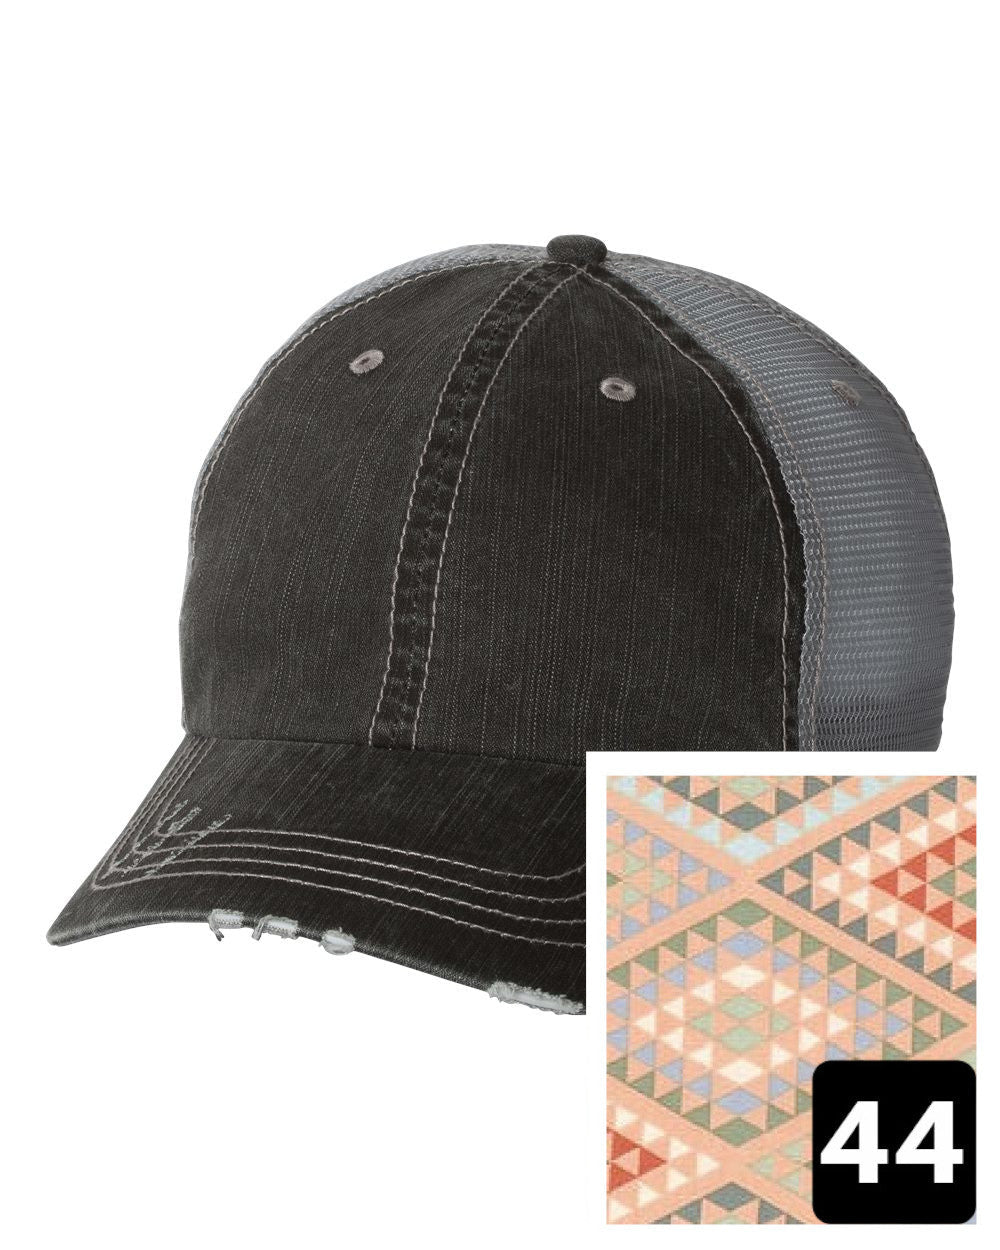 gray distressed trucker hat with navy coral and white chevron fabric state of Mississippi